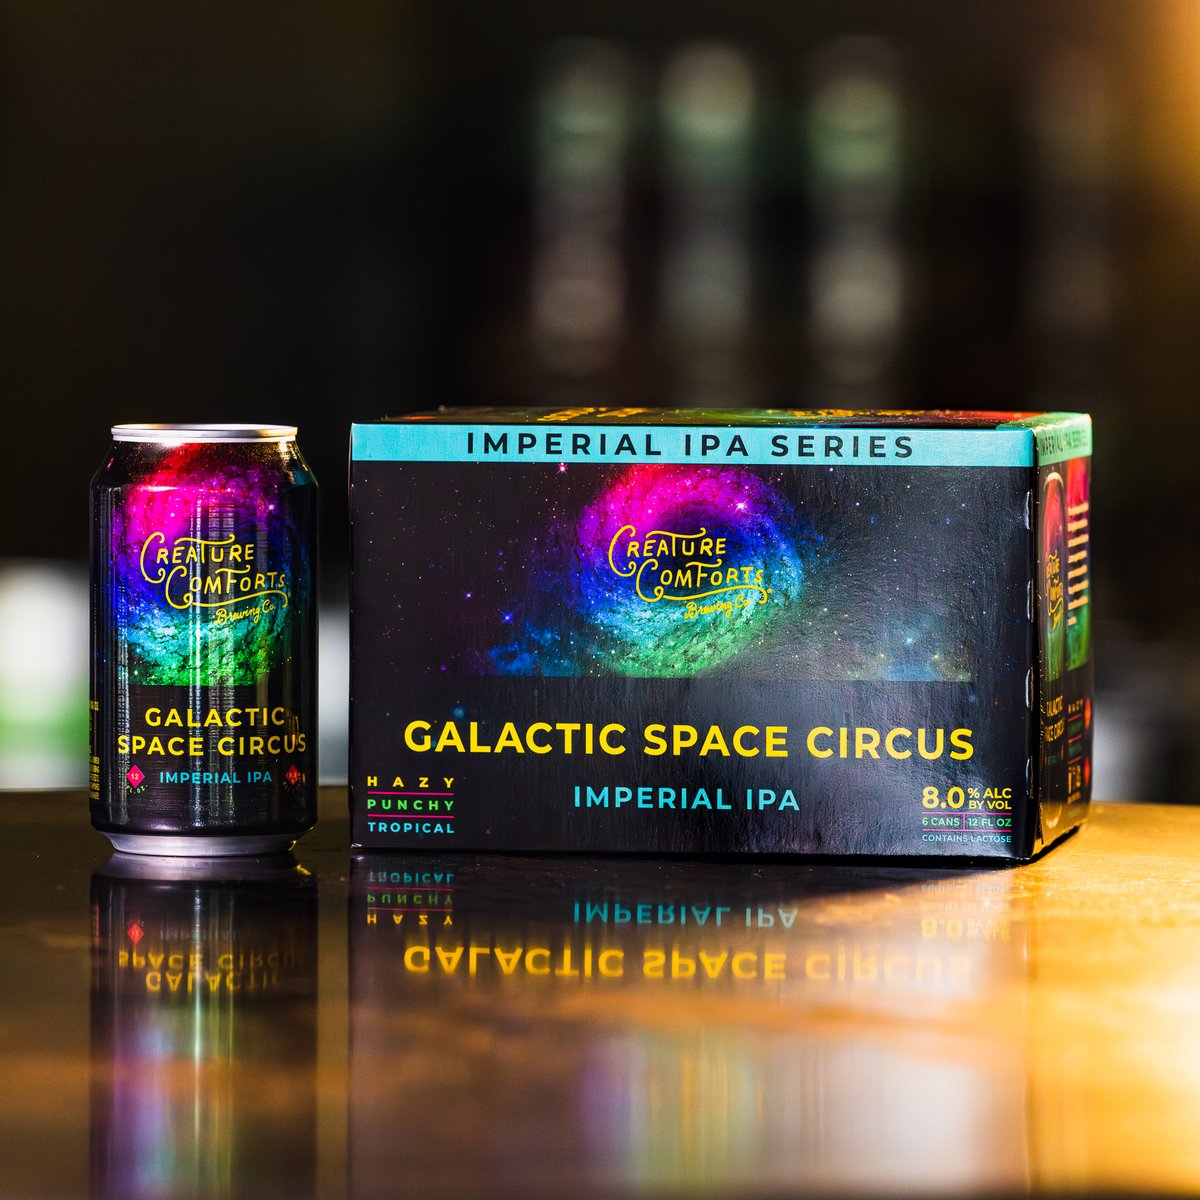 Heard about our new Imperial IPA Series? Throughout the year, this new series of beers will deliver the Imperial IPAs you love in convenient 12oz 6 packs. Enjoy Galactic Space Circus now and look forward to future releases like Loopulus, Stellar Drift, and more 🍻